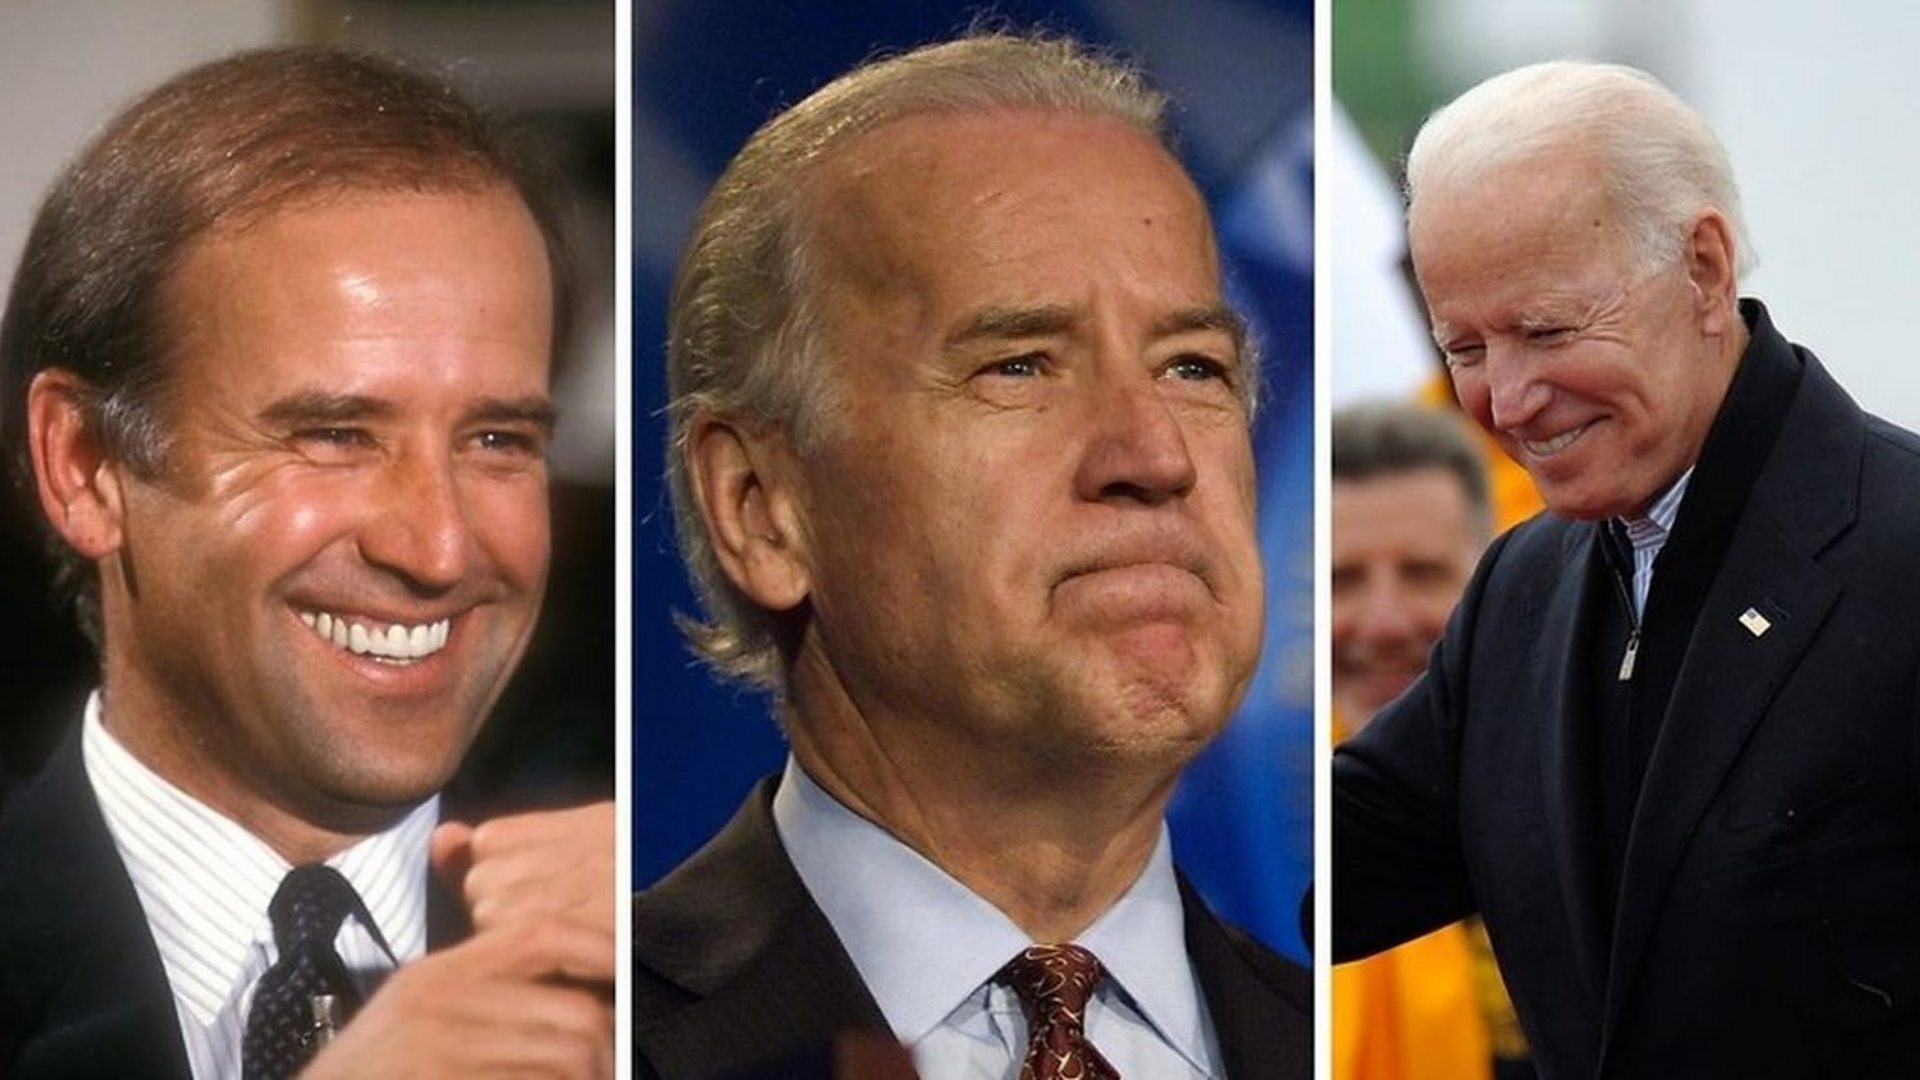 when does joe biden vote in the senate - Biden|President|Joe|Years|Trump|Delaware|Vice|Time|Obama|Senate|States|Law|Age|Campaign|Election|Administration|Family|House|Senator|Office|School|Wife|People|Hunter|University|Act|State|Year|Life|Party|Committee|Children|Beau|Daughter|War|Jill|Day|Facts|Americans|Presidency|Joe Biden|United States|Vice President|White House|Law School|President Trump|Foreign Relations Committee|Donald Trump|President Biden|Presidential Campaign|Presidential Election|Democratic Party|Syracuse University|United Nations|Net Worth|Barack Obama|Judiciary Committee|Neilia Hunter|U.S. Senate|Hillary Clinton|New York Times|Obama Administration|Empty Store Shelves|Systemic Racism|Castle County Council|Archmere Academy|U.S. Senator|Vice Presidency|Second Term|Biden Administration